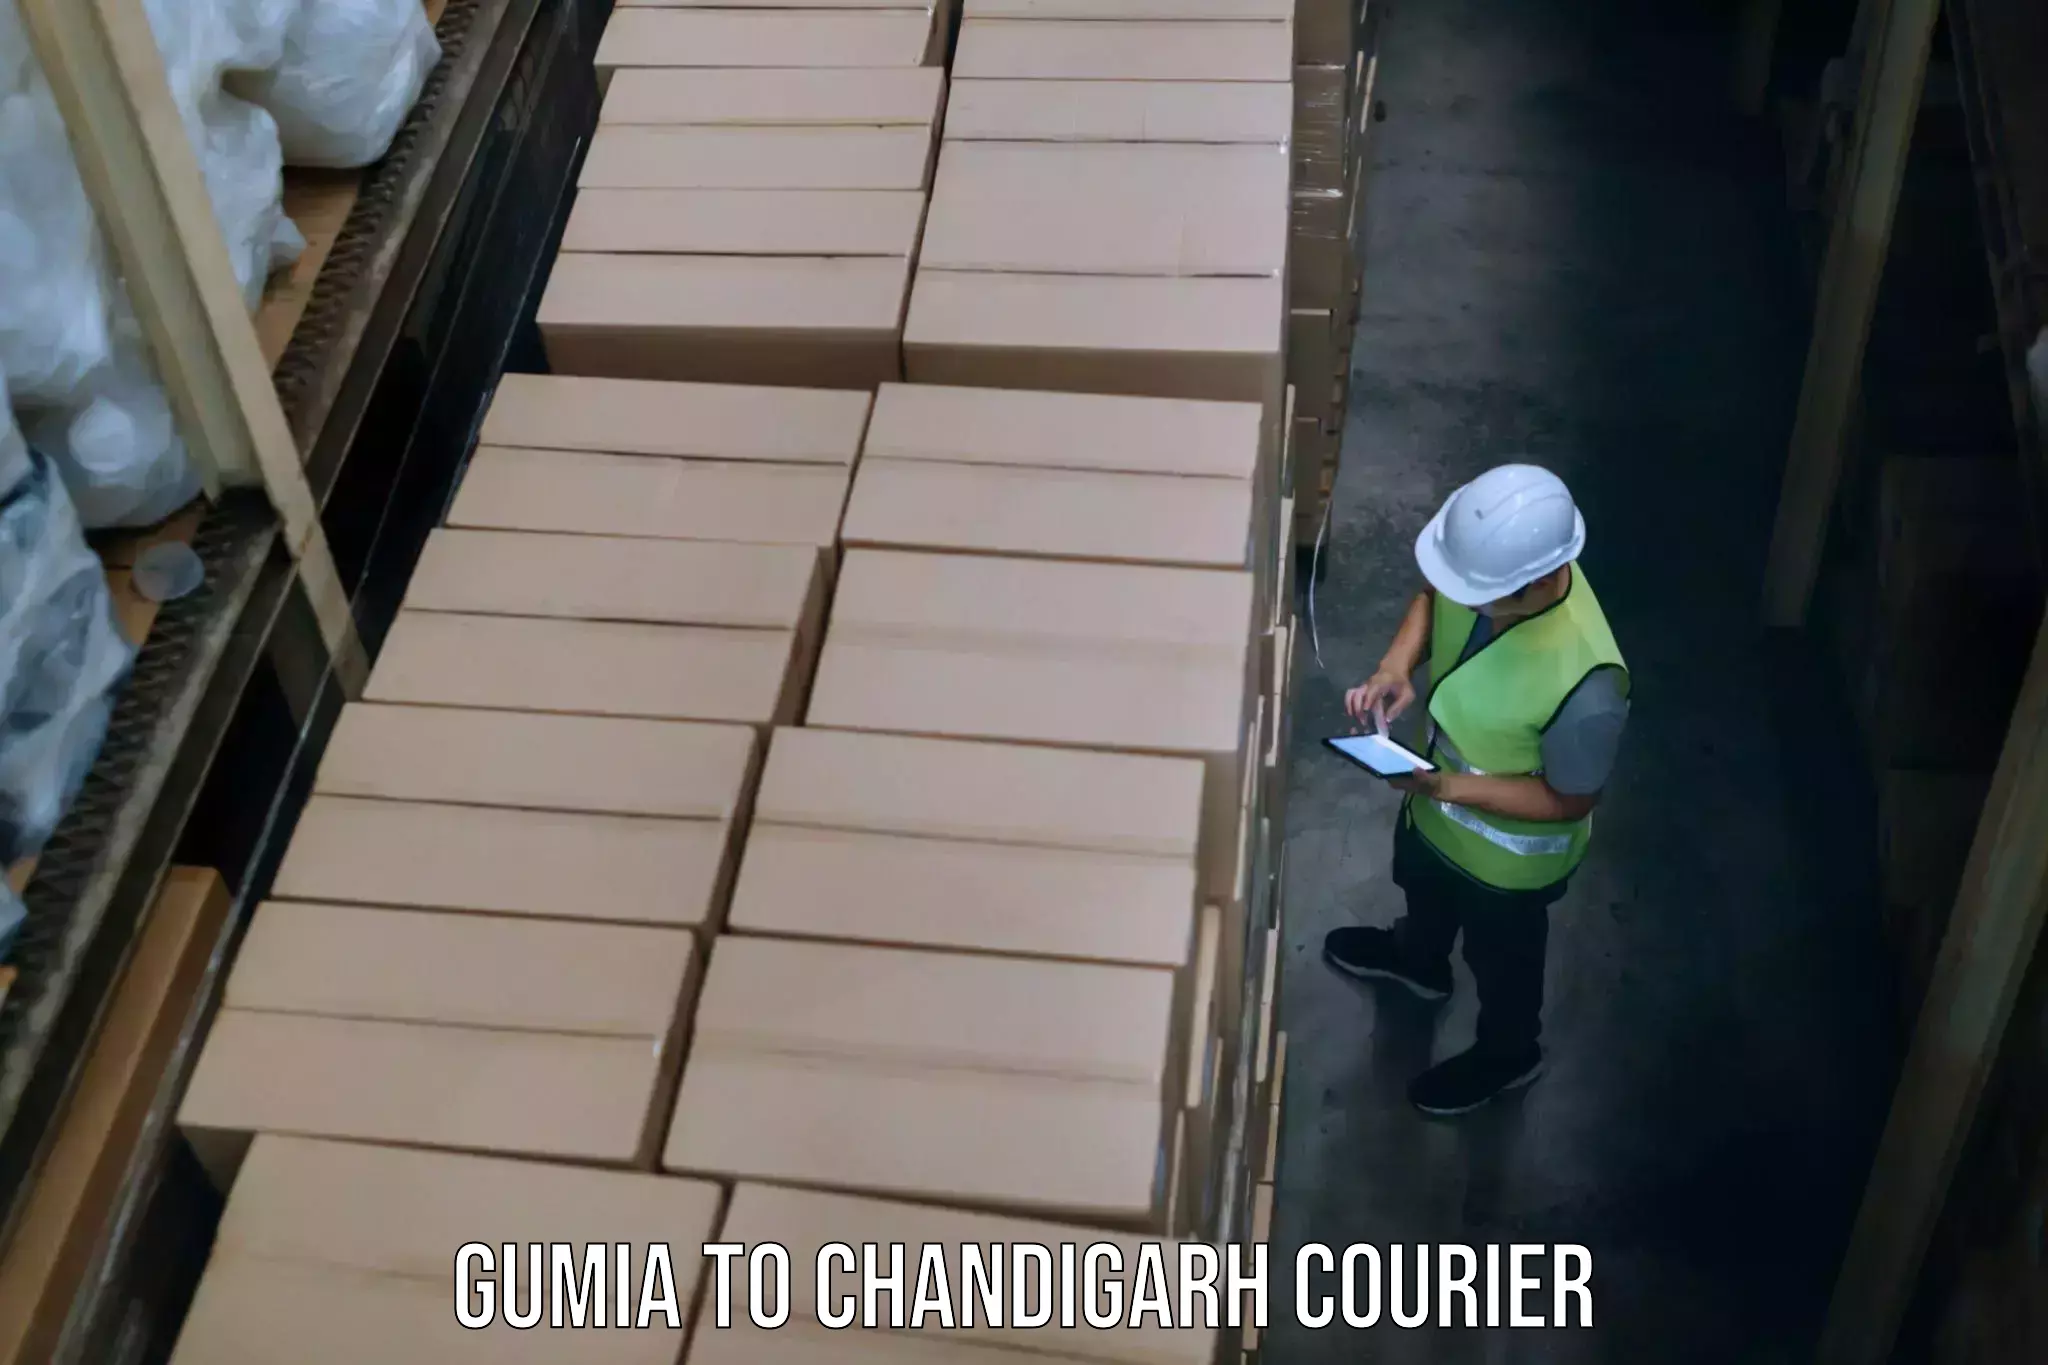 Baggage relocation service Gumia to Chandigarh